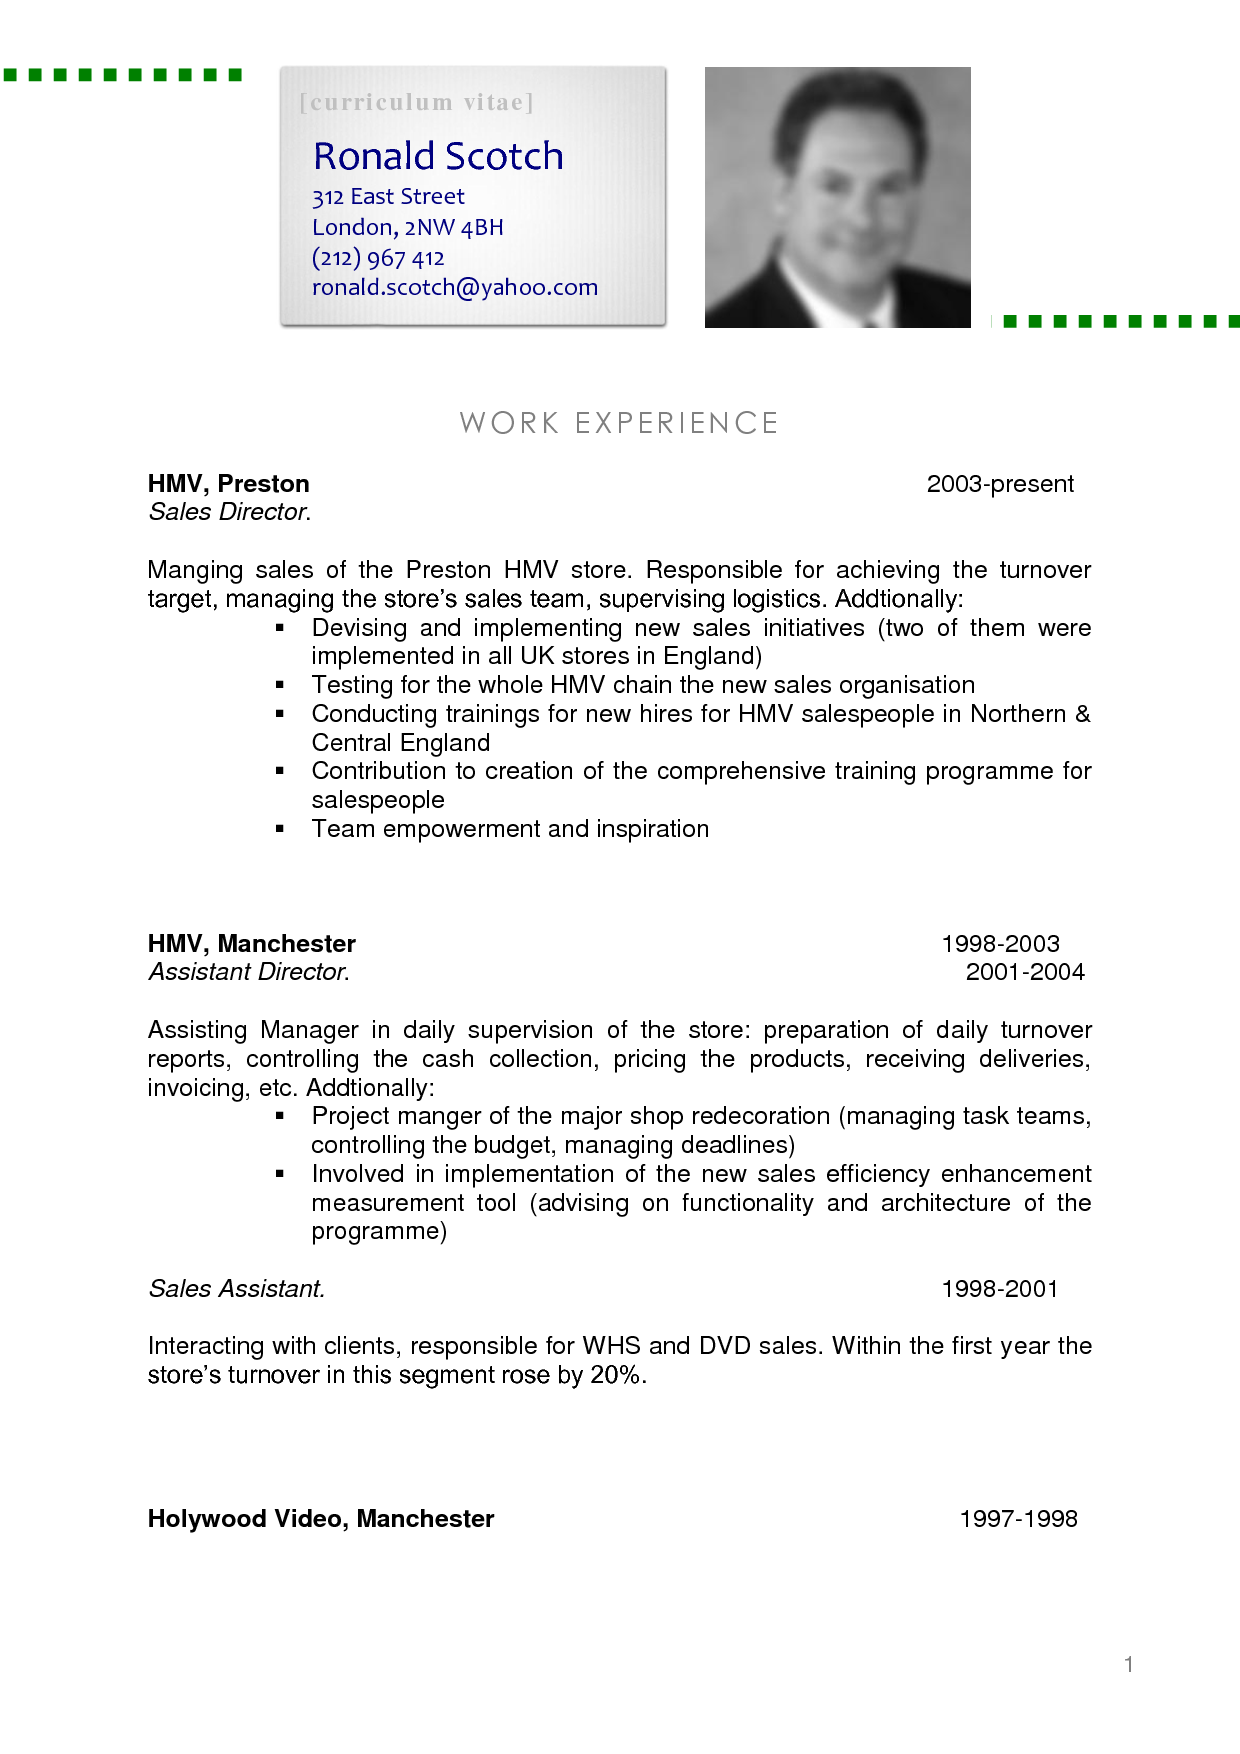 What Is A Cv Curriculum Vitae Examples Templates - Riset